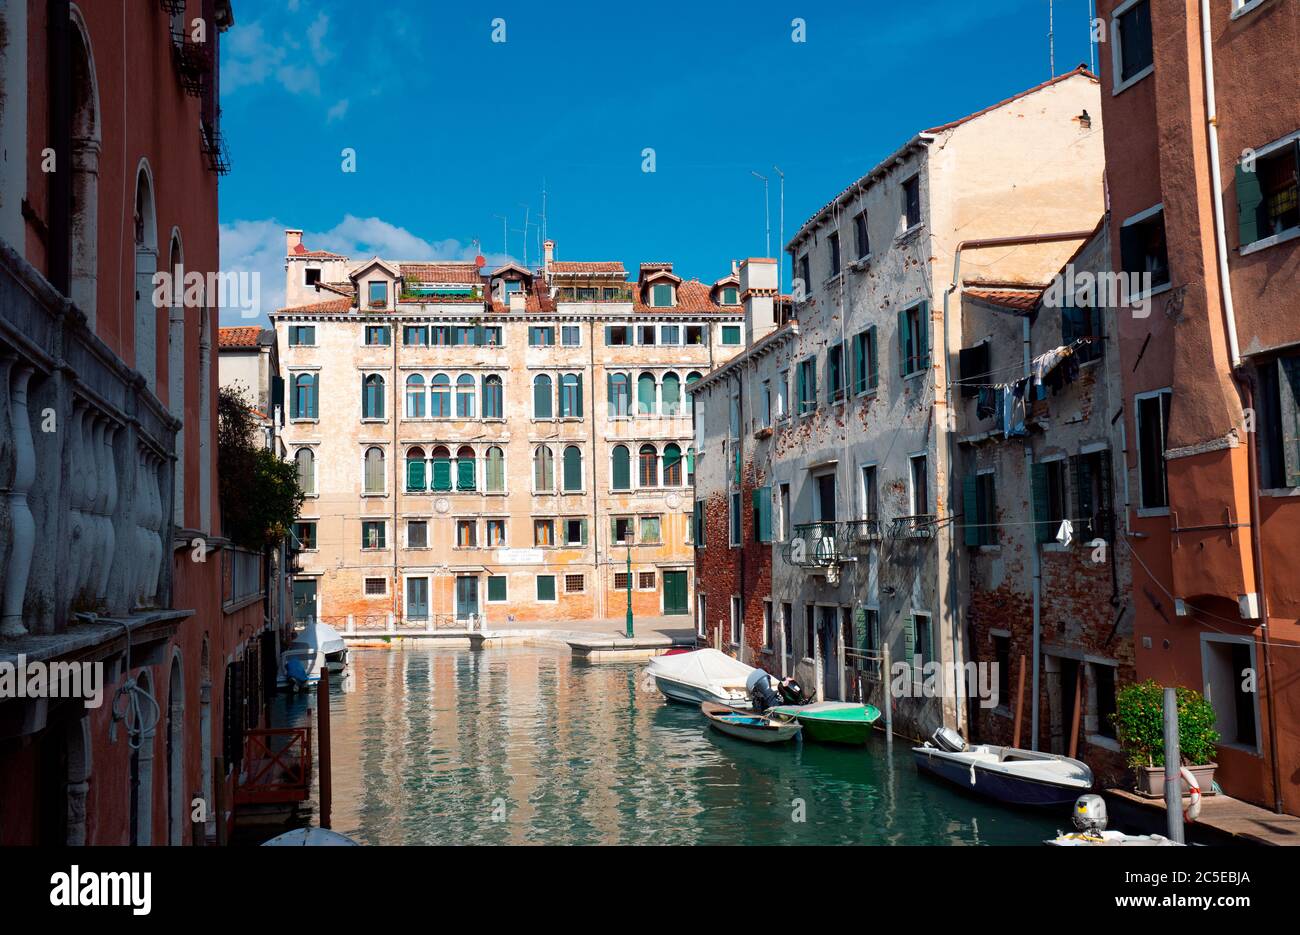 Oct. 1, 2019 - Venice, Italy: view to the colorful houses of the famous city. Stock Photo